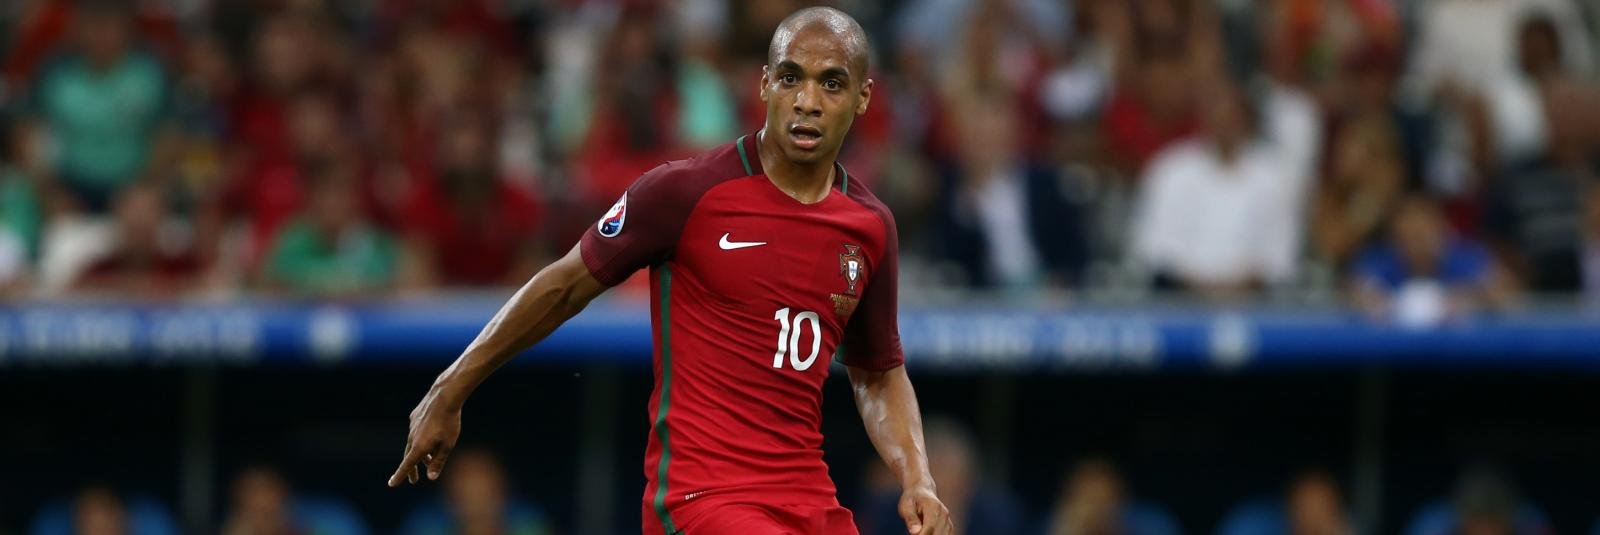 Liverpool have £33.5m bid for Portugal international rejected